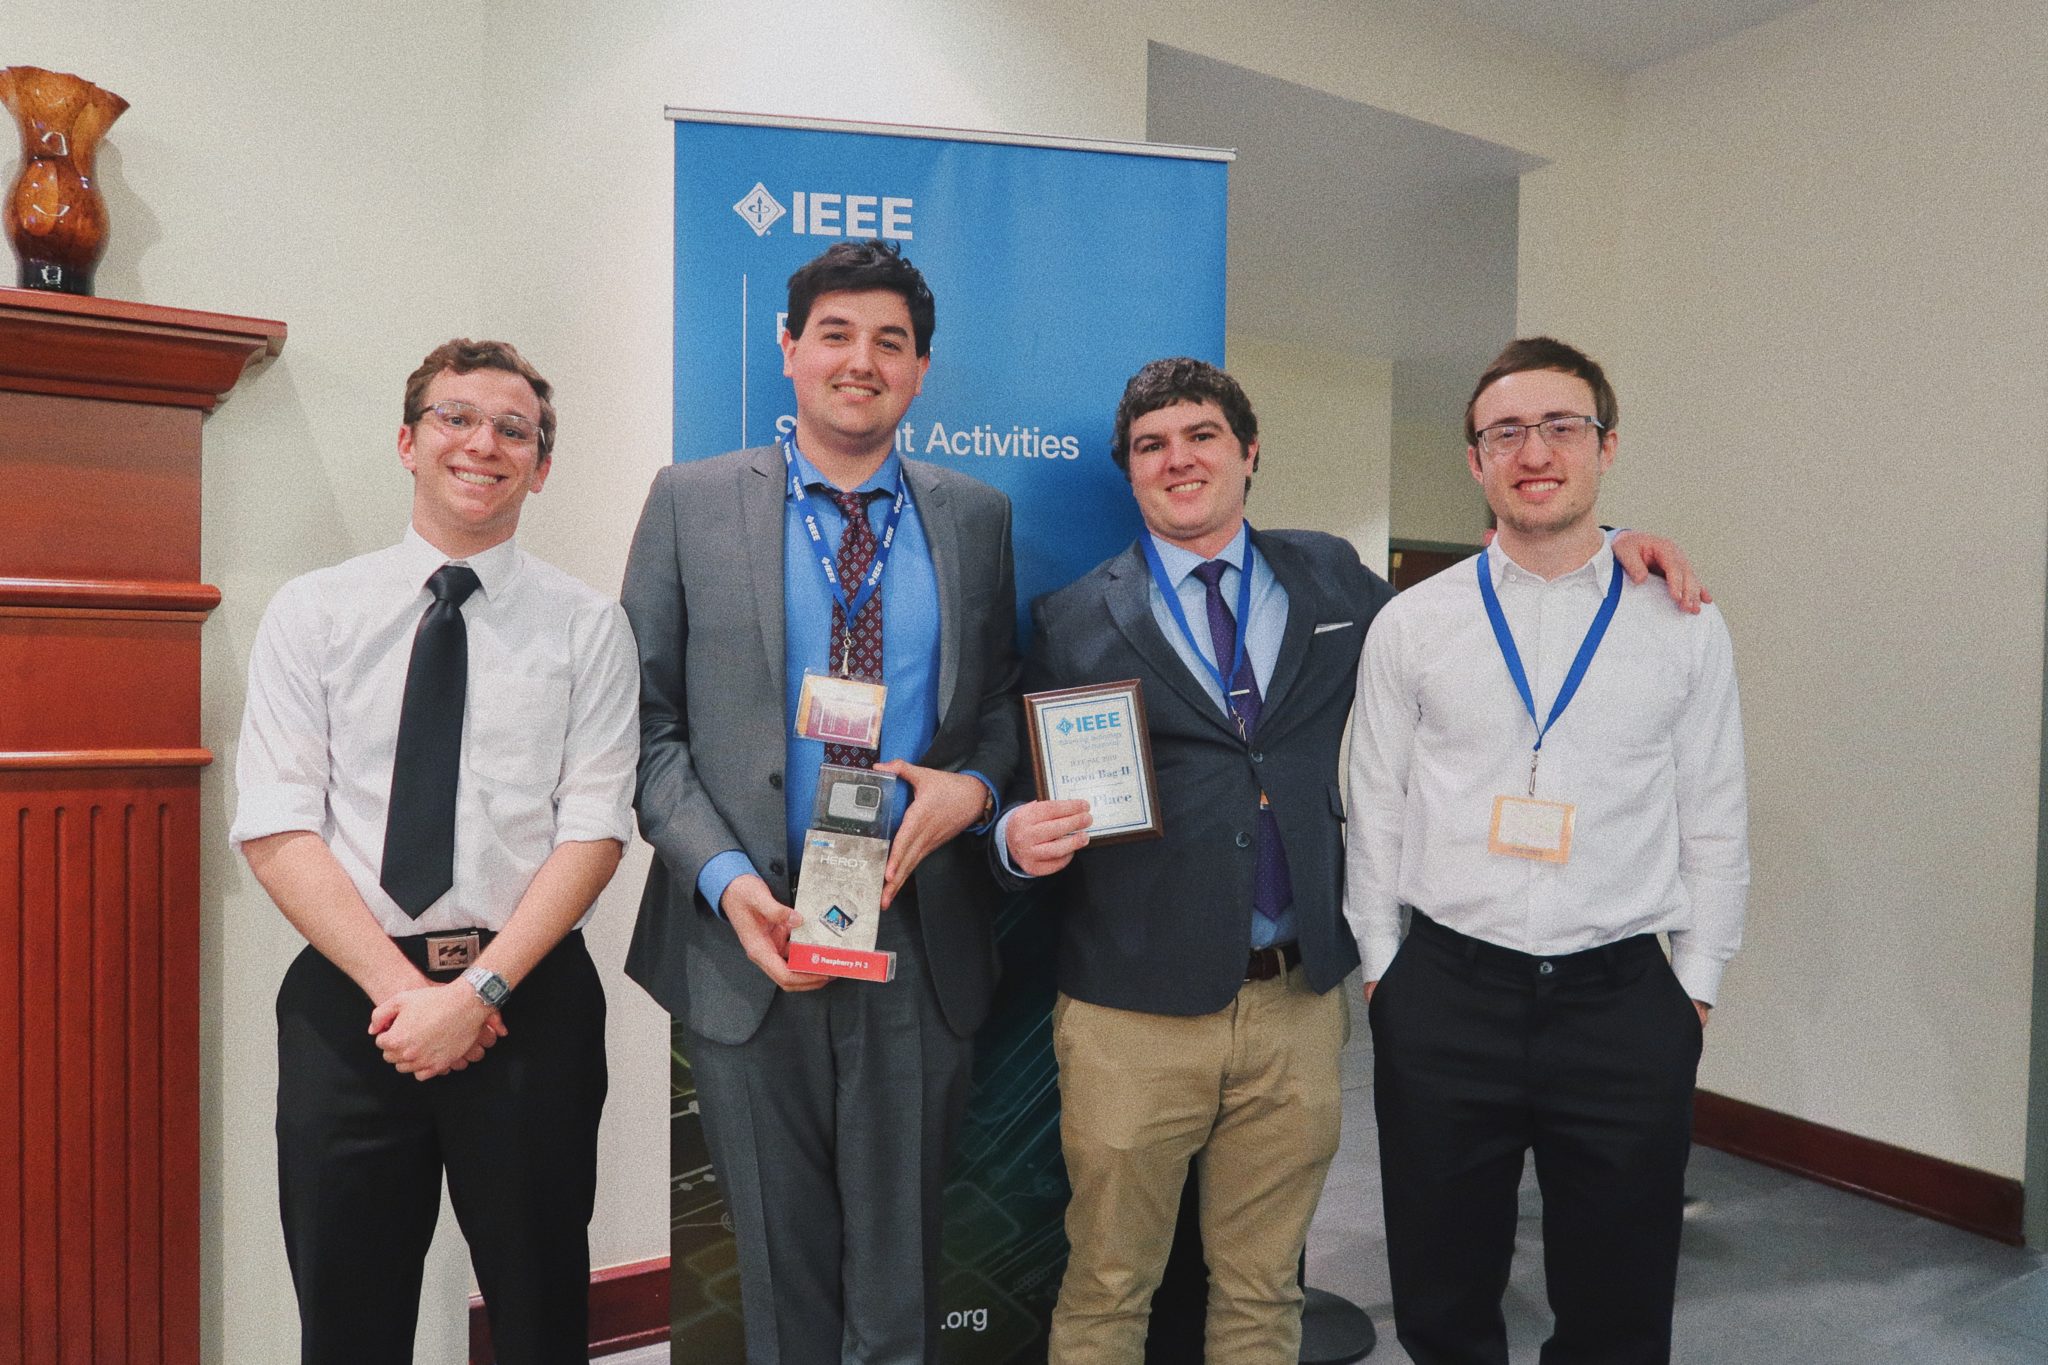 IEEE Students Take Top Honors at Students Activities Conference